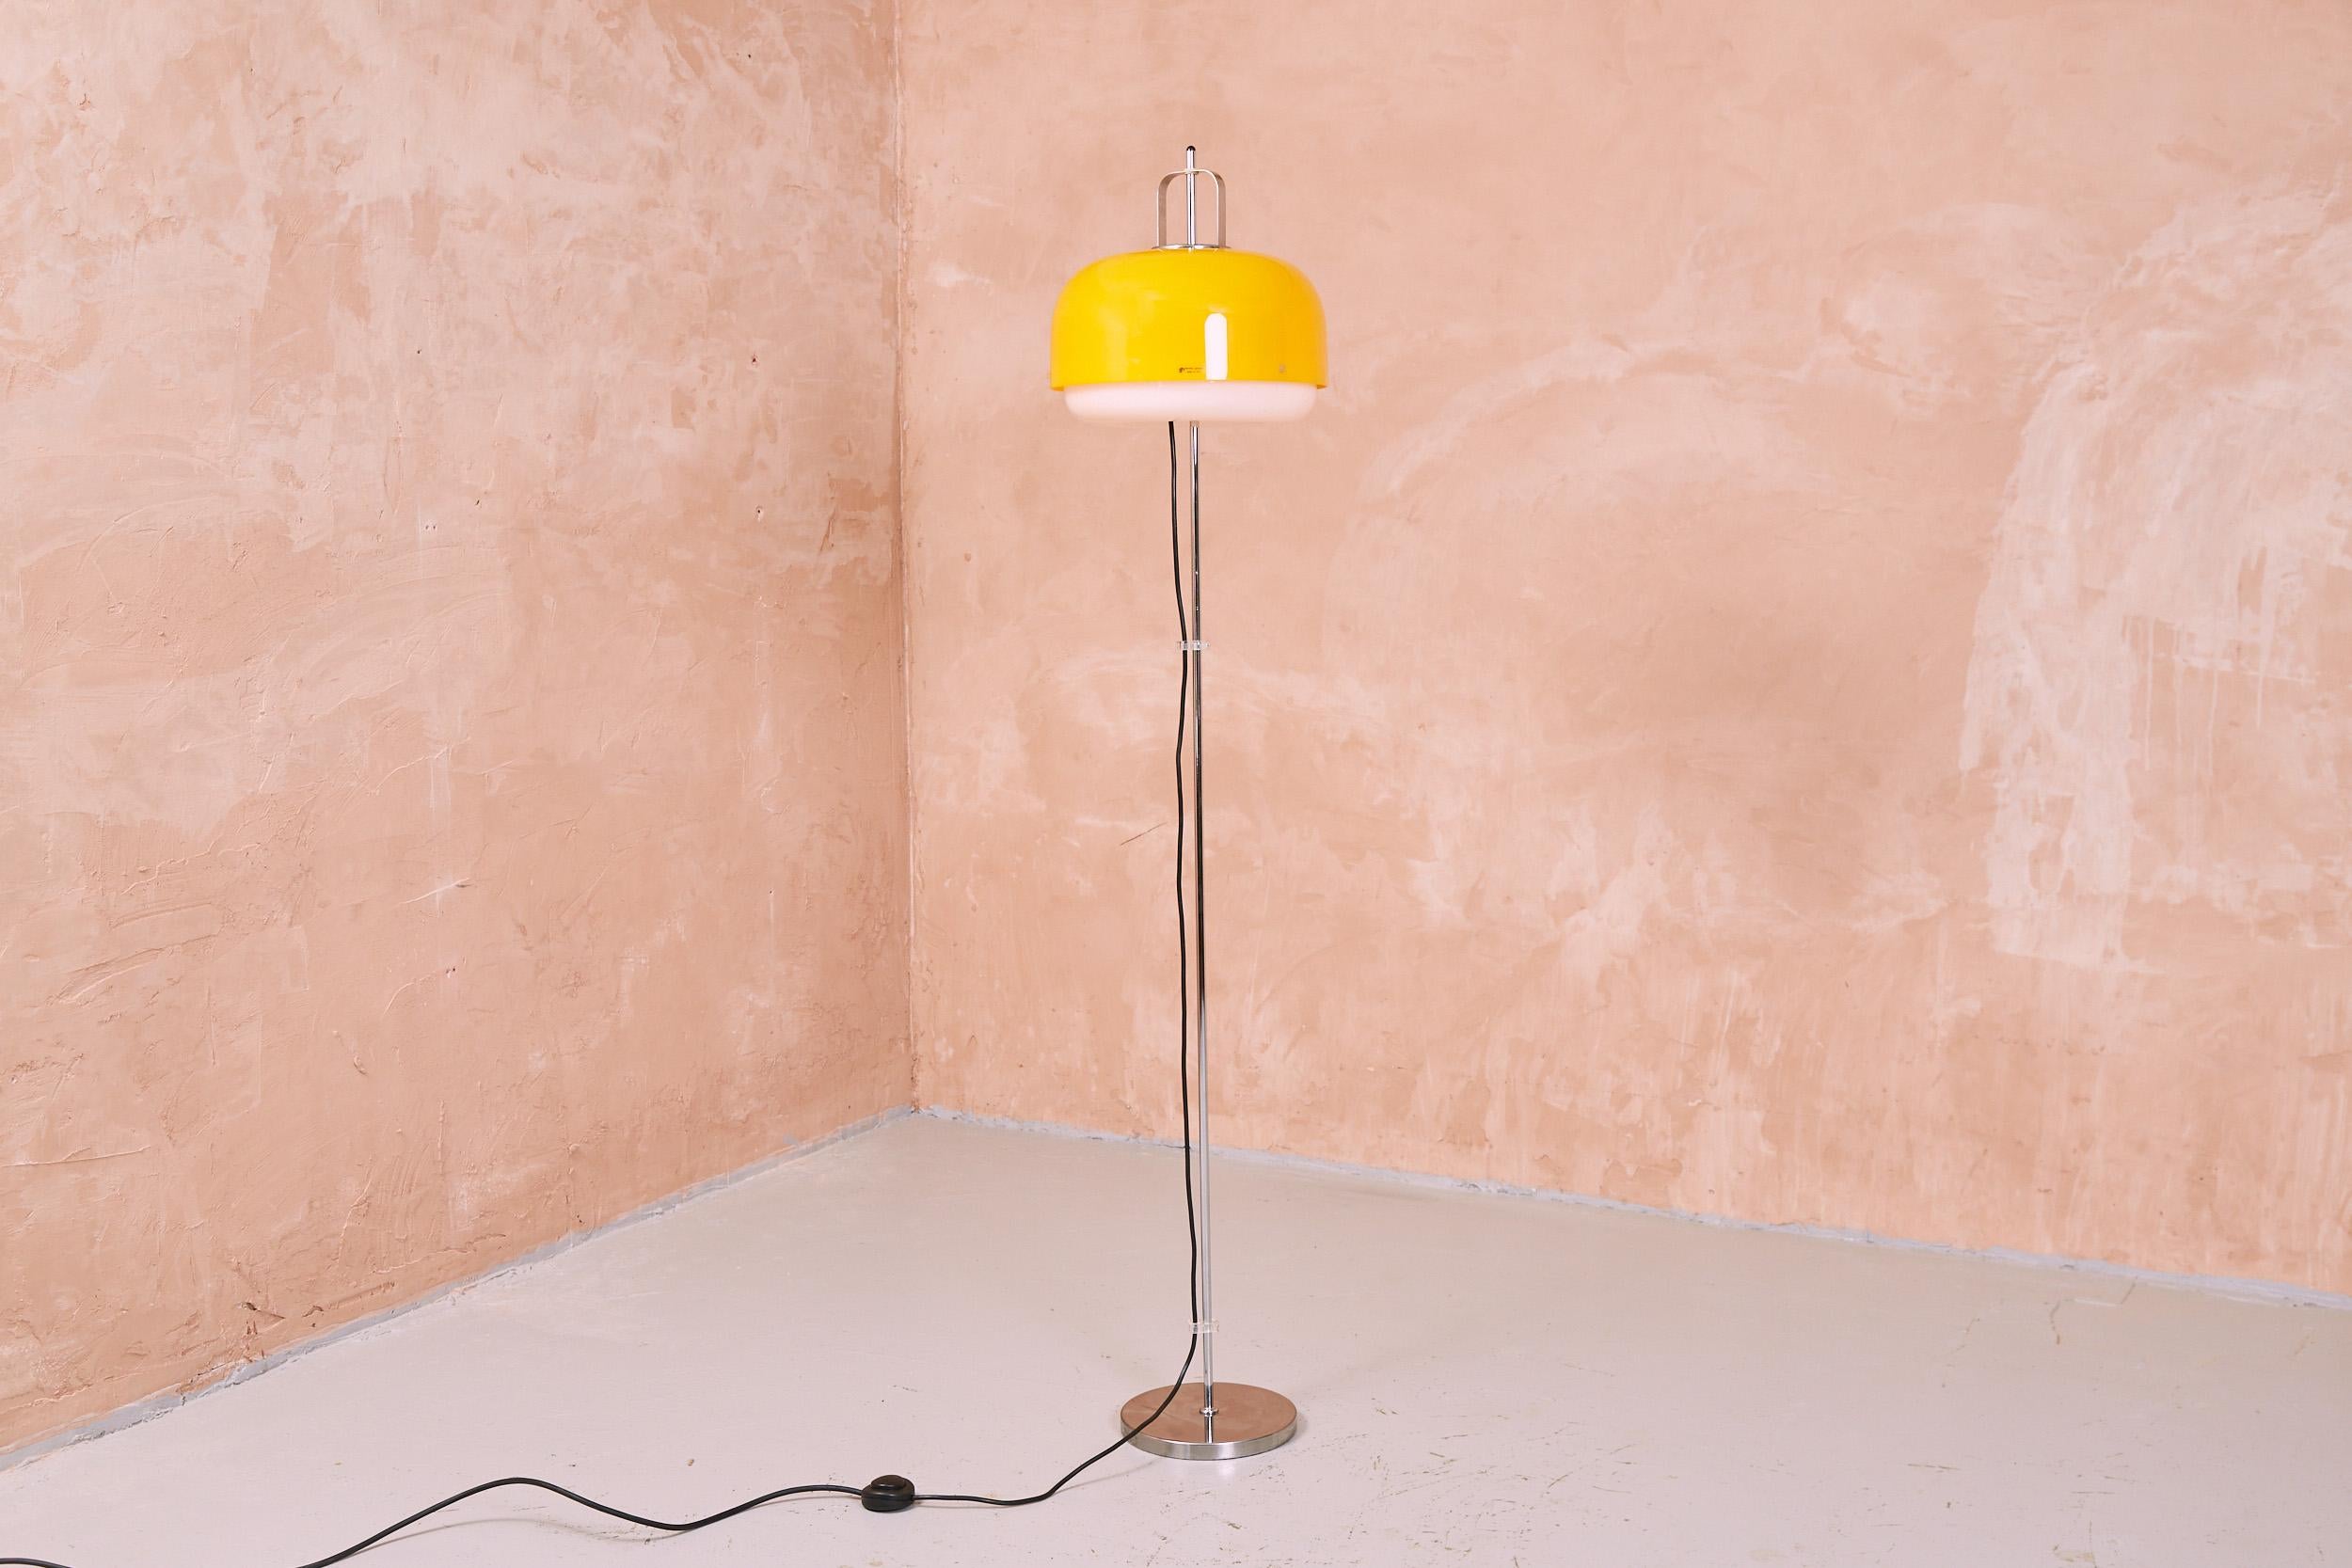 The Medusa floor lamp was designed by Luigi Massoni and produced by the renowned Italian design house Guzzini in the 1970s. The vibrant yellow shade is made from acrylic and has a floating white acrylic underside to give a clean downward light.